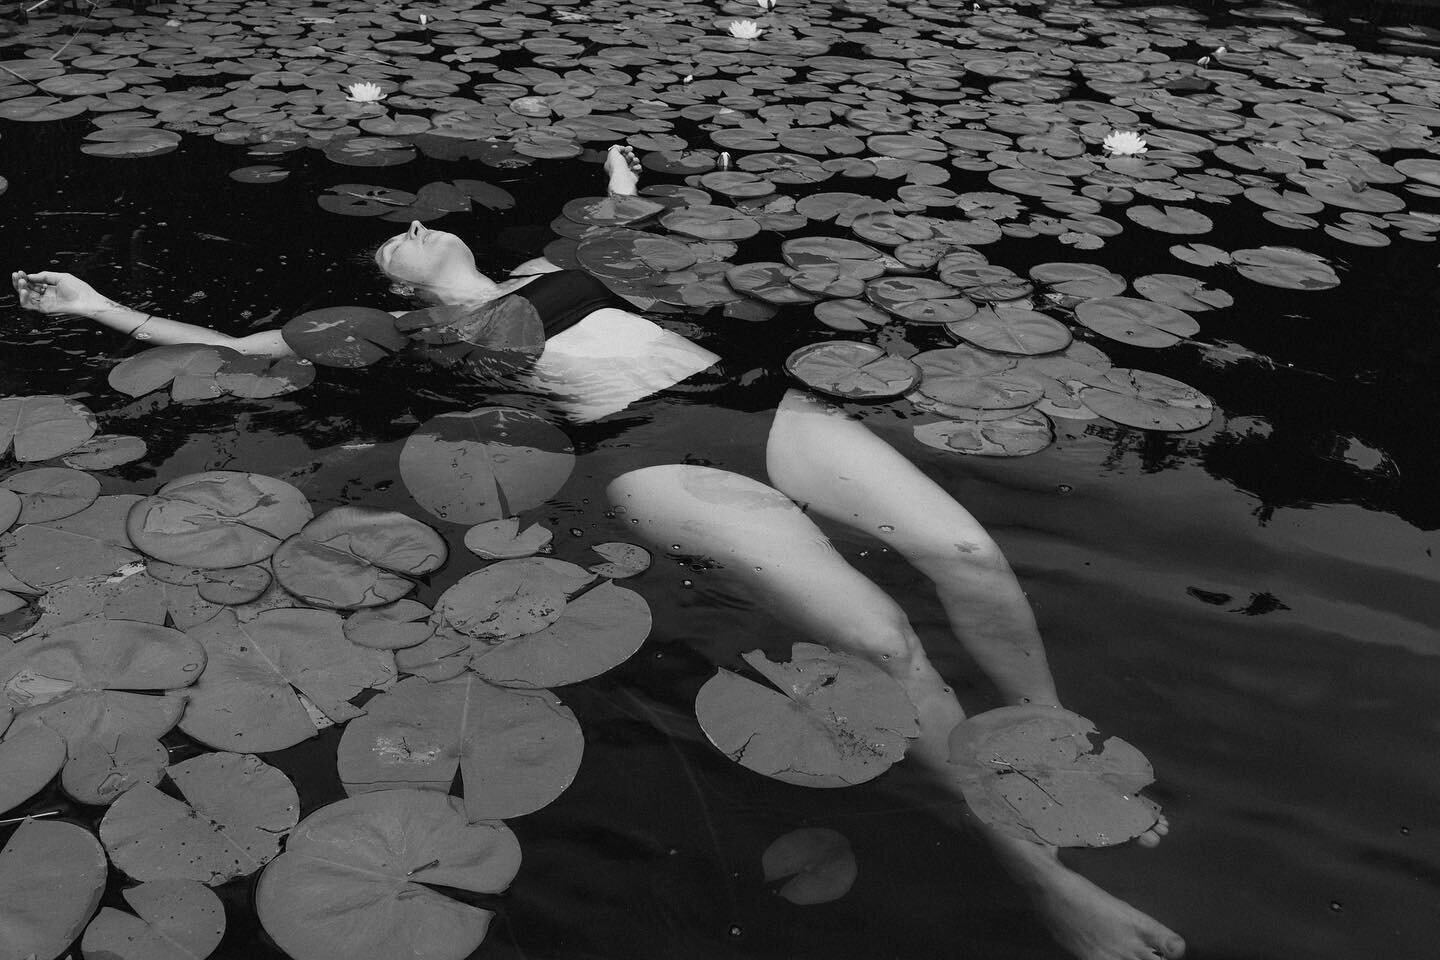 Mentally, I&rsquo;m here. 

Floating in the lily pads at my friend Gabe&rsquo;s pond. 

Captured by the talented @roxannedukephotog 

Can&rsquo;t wait to share more of this shoot. 

And holy heck, I am excited to be heading back to the land tomorrow.